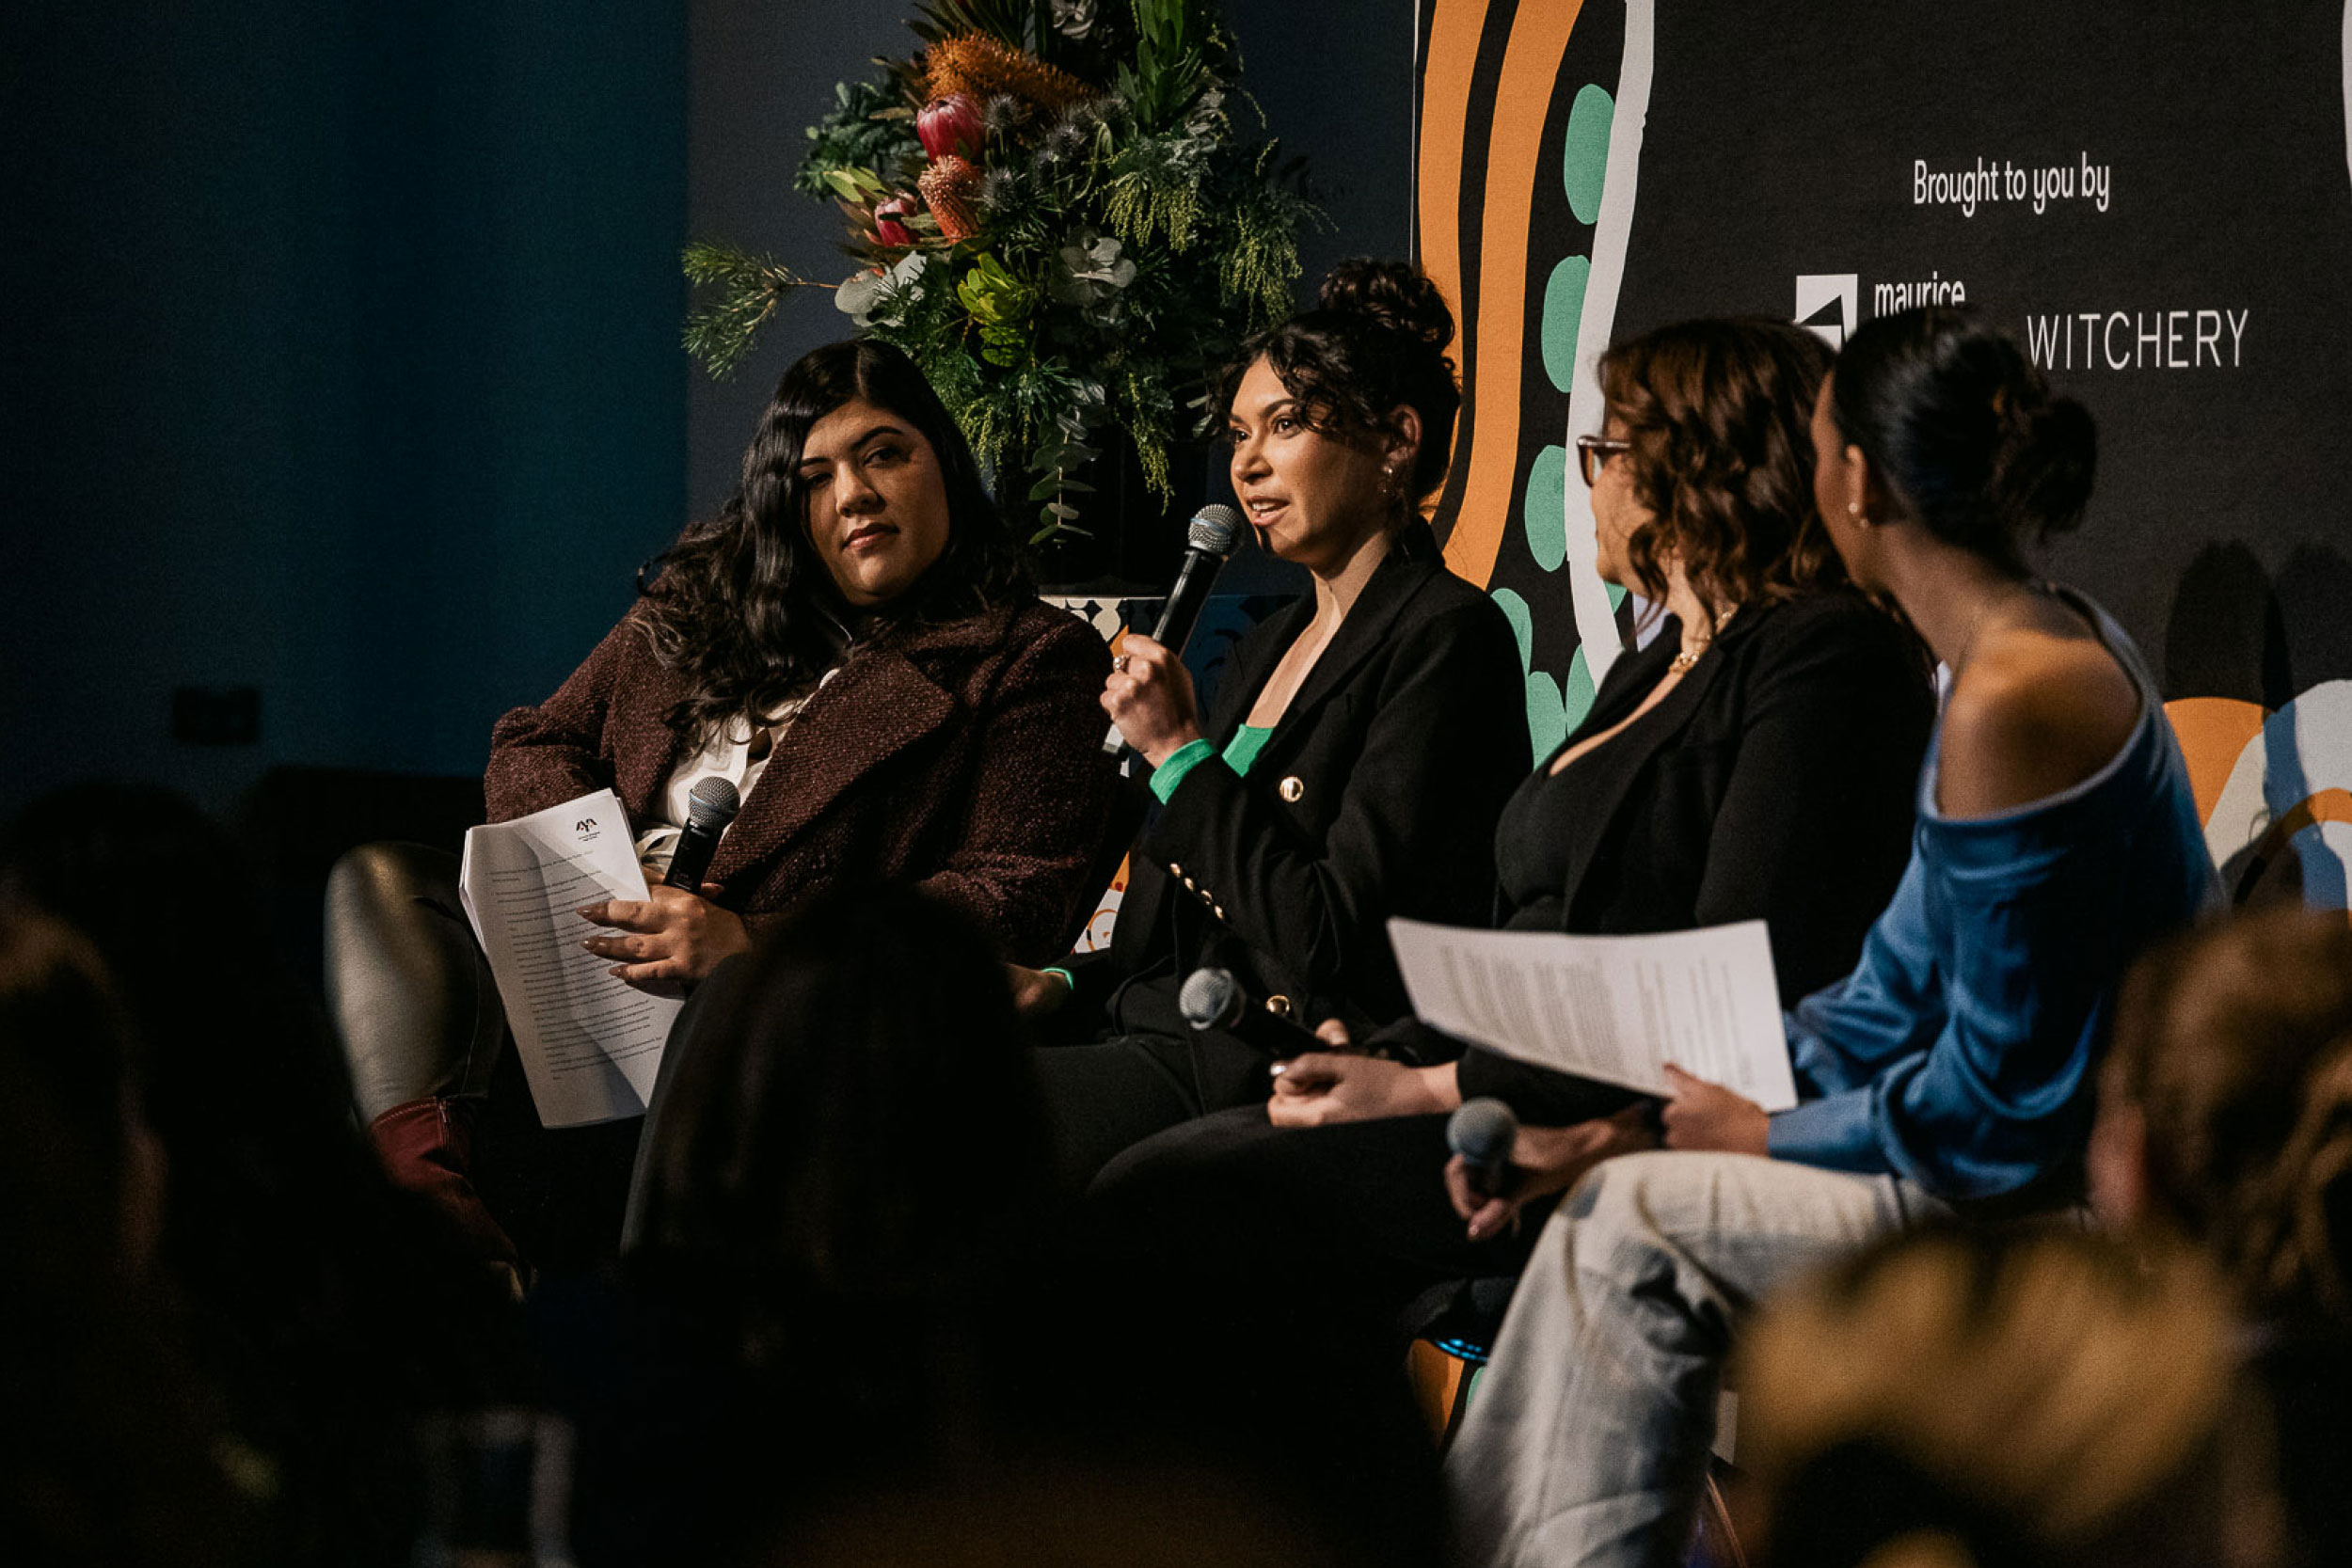 Filmmaker Kimberley Benjamin speaks about an increased interest in First Nations storytelling at Future Women's NAIDOC Breakfast Panel. Left, Nerita Waight, right, Tanya Hosch and Madison Howarth.